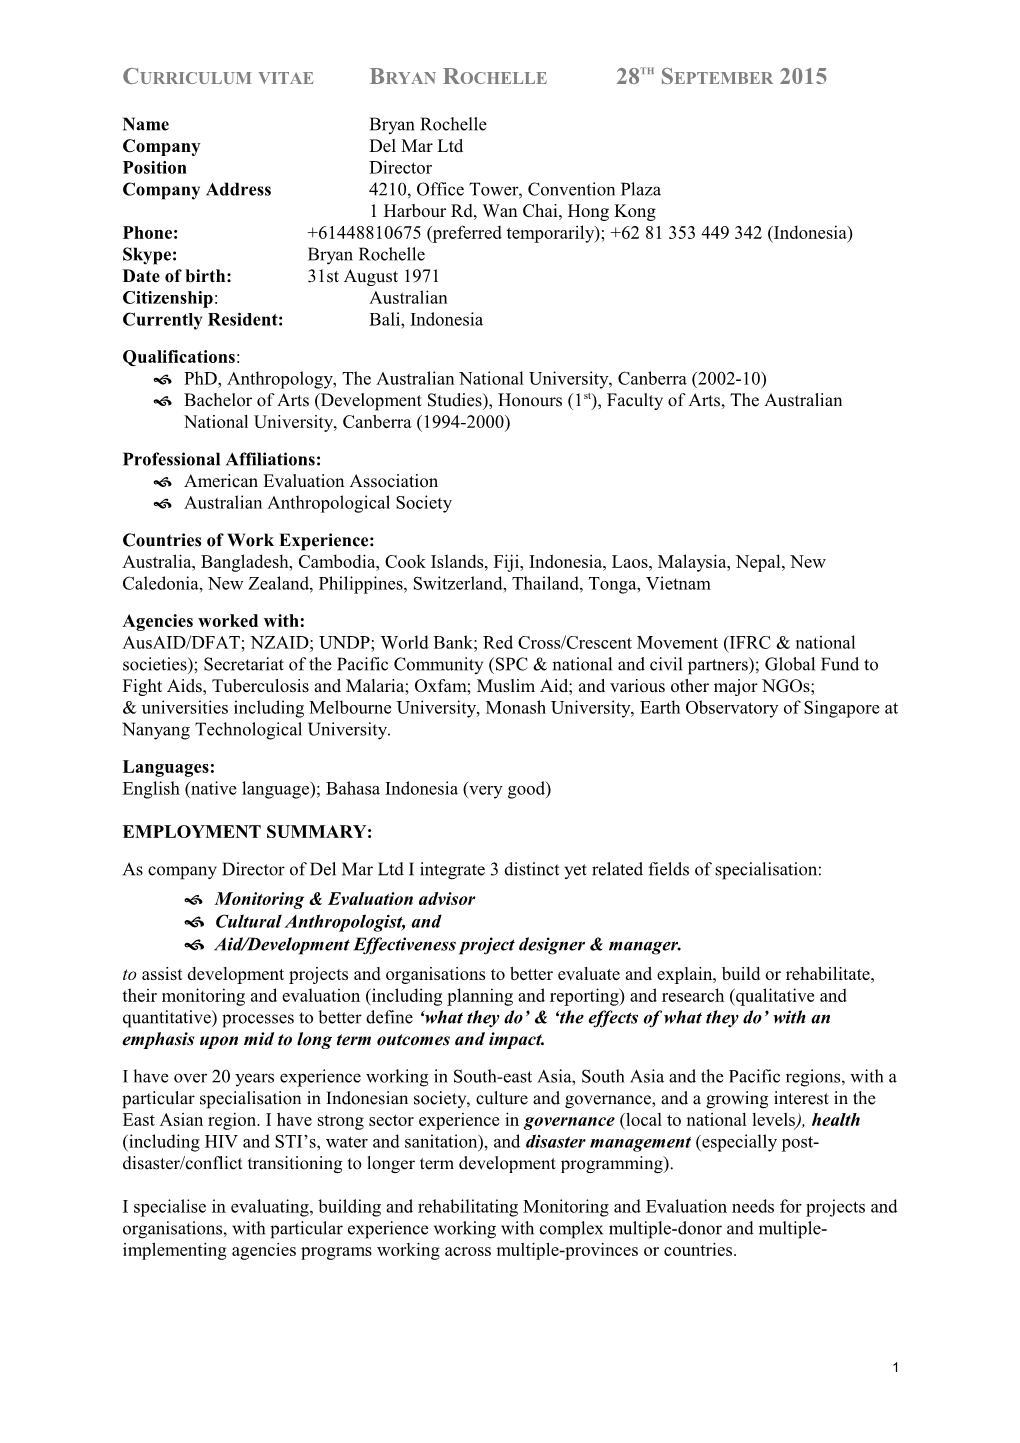 Form Tech-6 Curriculum Vitae (Cv) for Proposed International Or National Experts